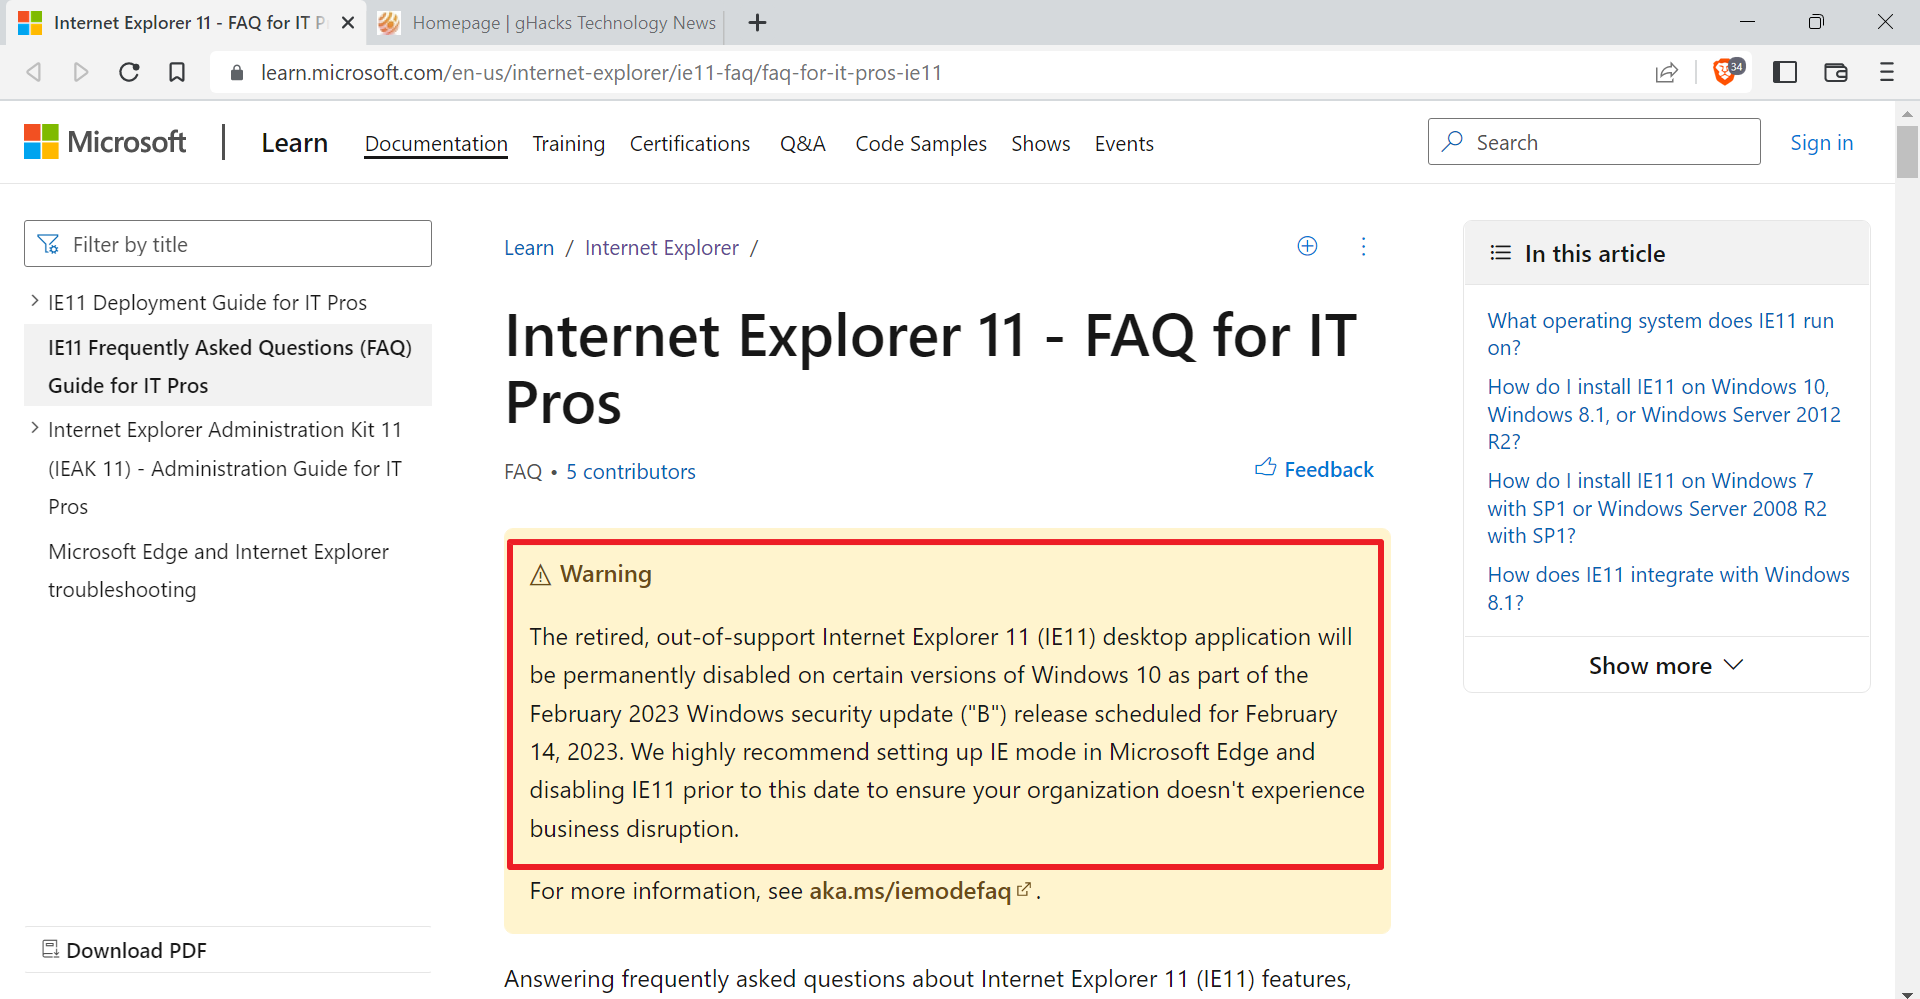 Still using Internet Explorer 11 on Windows 10? It will be disabled in February 2023